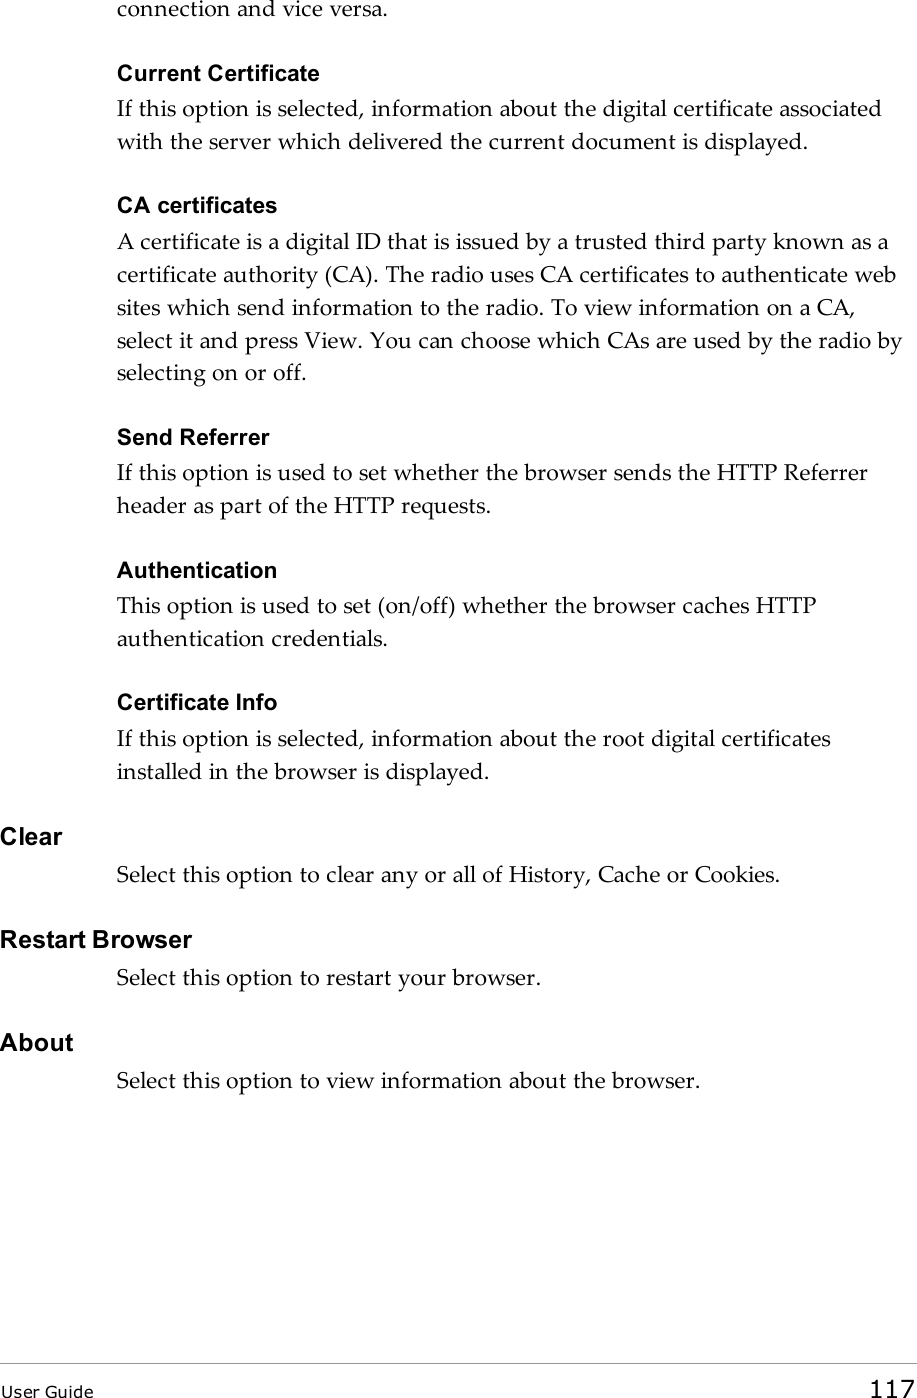 connection and vice versa.Current CertificateIf this option is selected, information about the digital certificate associatedwith the server which delivered the current document is displayed.CA certificatesA certificate is a digital ID that is issued by a trusted third party known as acertificate authority (CA). The radio uses CA certificates to authenticate websites which send information to the radio. To view information on a CA,select it and press View. You can choose which CAs are used by the radio byselecting on or off.Send ReferrerIf this option is used to set whether the browser sends the HTTP Referrerheader as part of the HTTP requests.AuthenticationThis option is used to set (on/off) whether the browser caches HTTPauthentication credentials.Certificate InfoIf this option is selected, information about the root digital certificatesinstalled in the browser is displayed.ClearSelect this option to clear any or all of History, Cache or Cookies.Restart BrowserSelect this option to restart your browser.AboutSelect this option to view information about the browser.User Guide 117